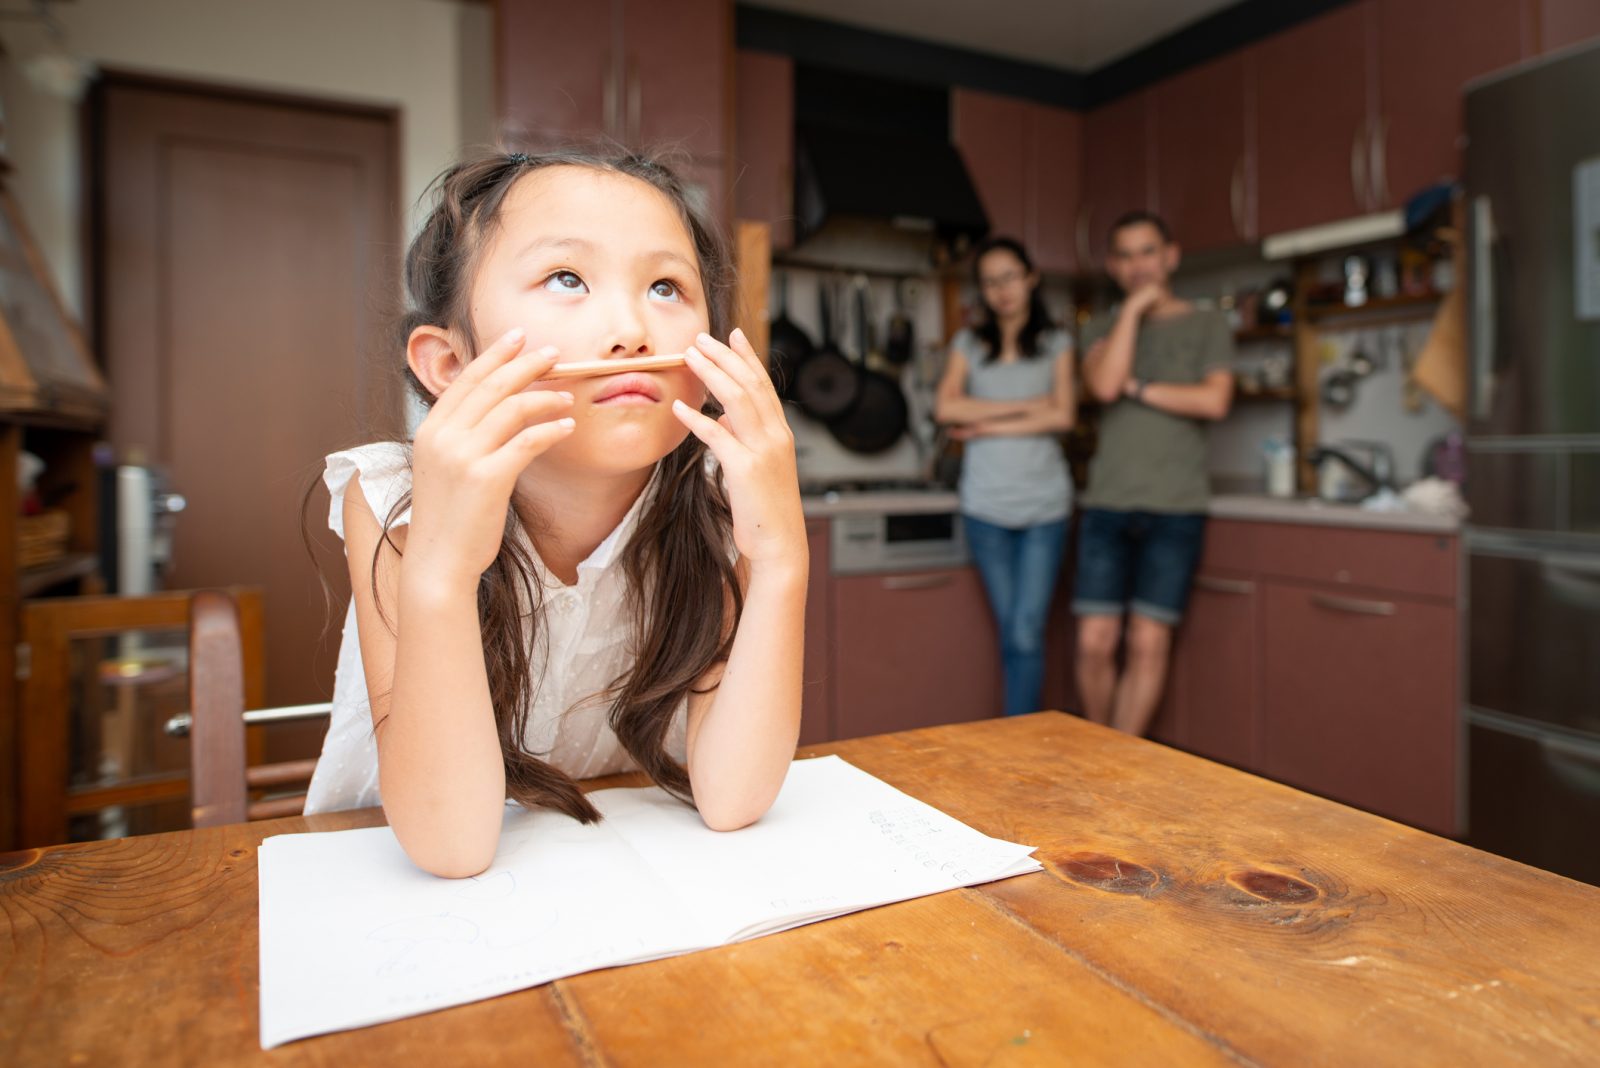 A child balances a pencil between her nose and lip while struggling with homework at the kitchen table, while parents watch from the background.